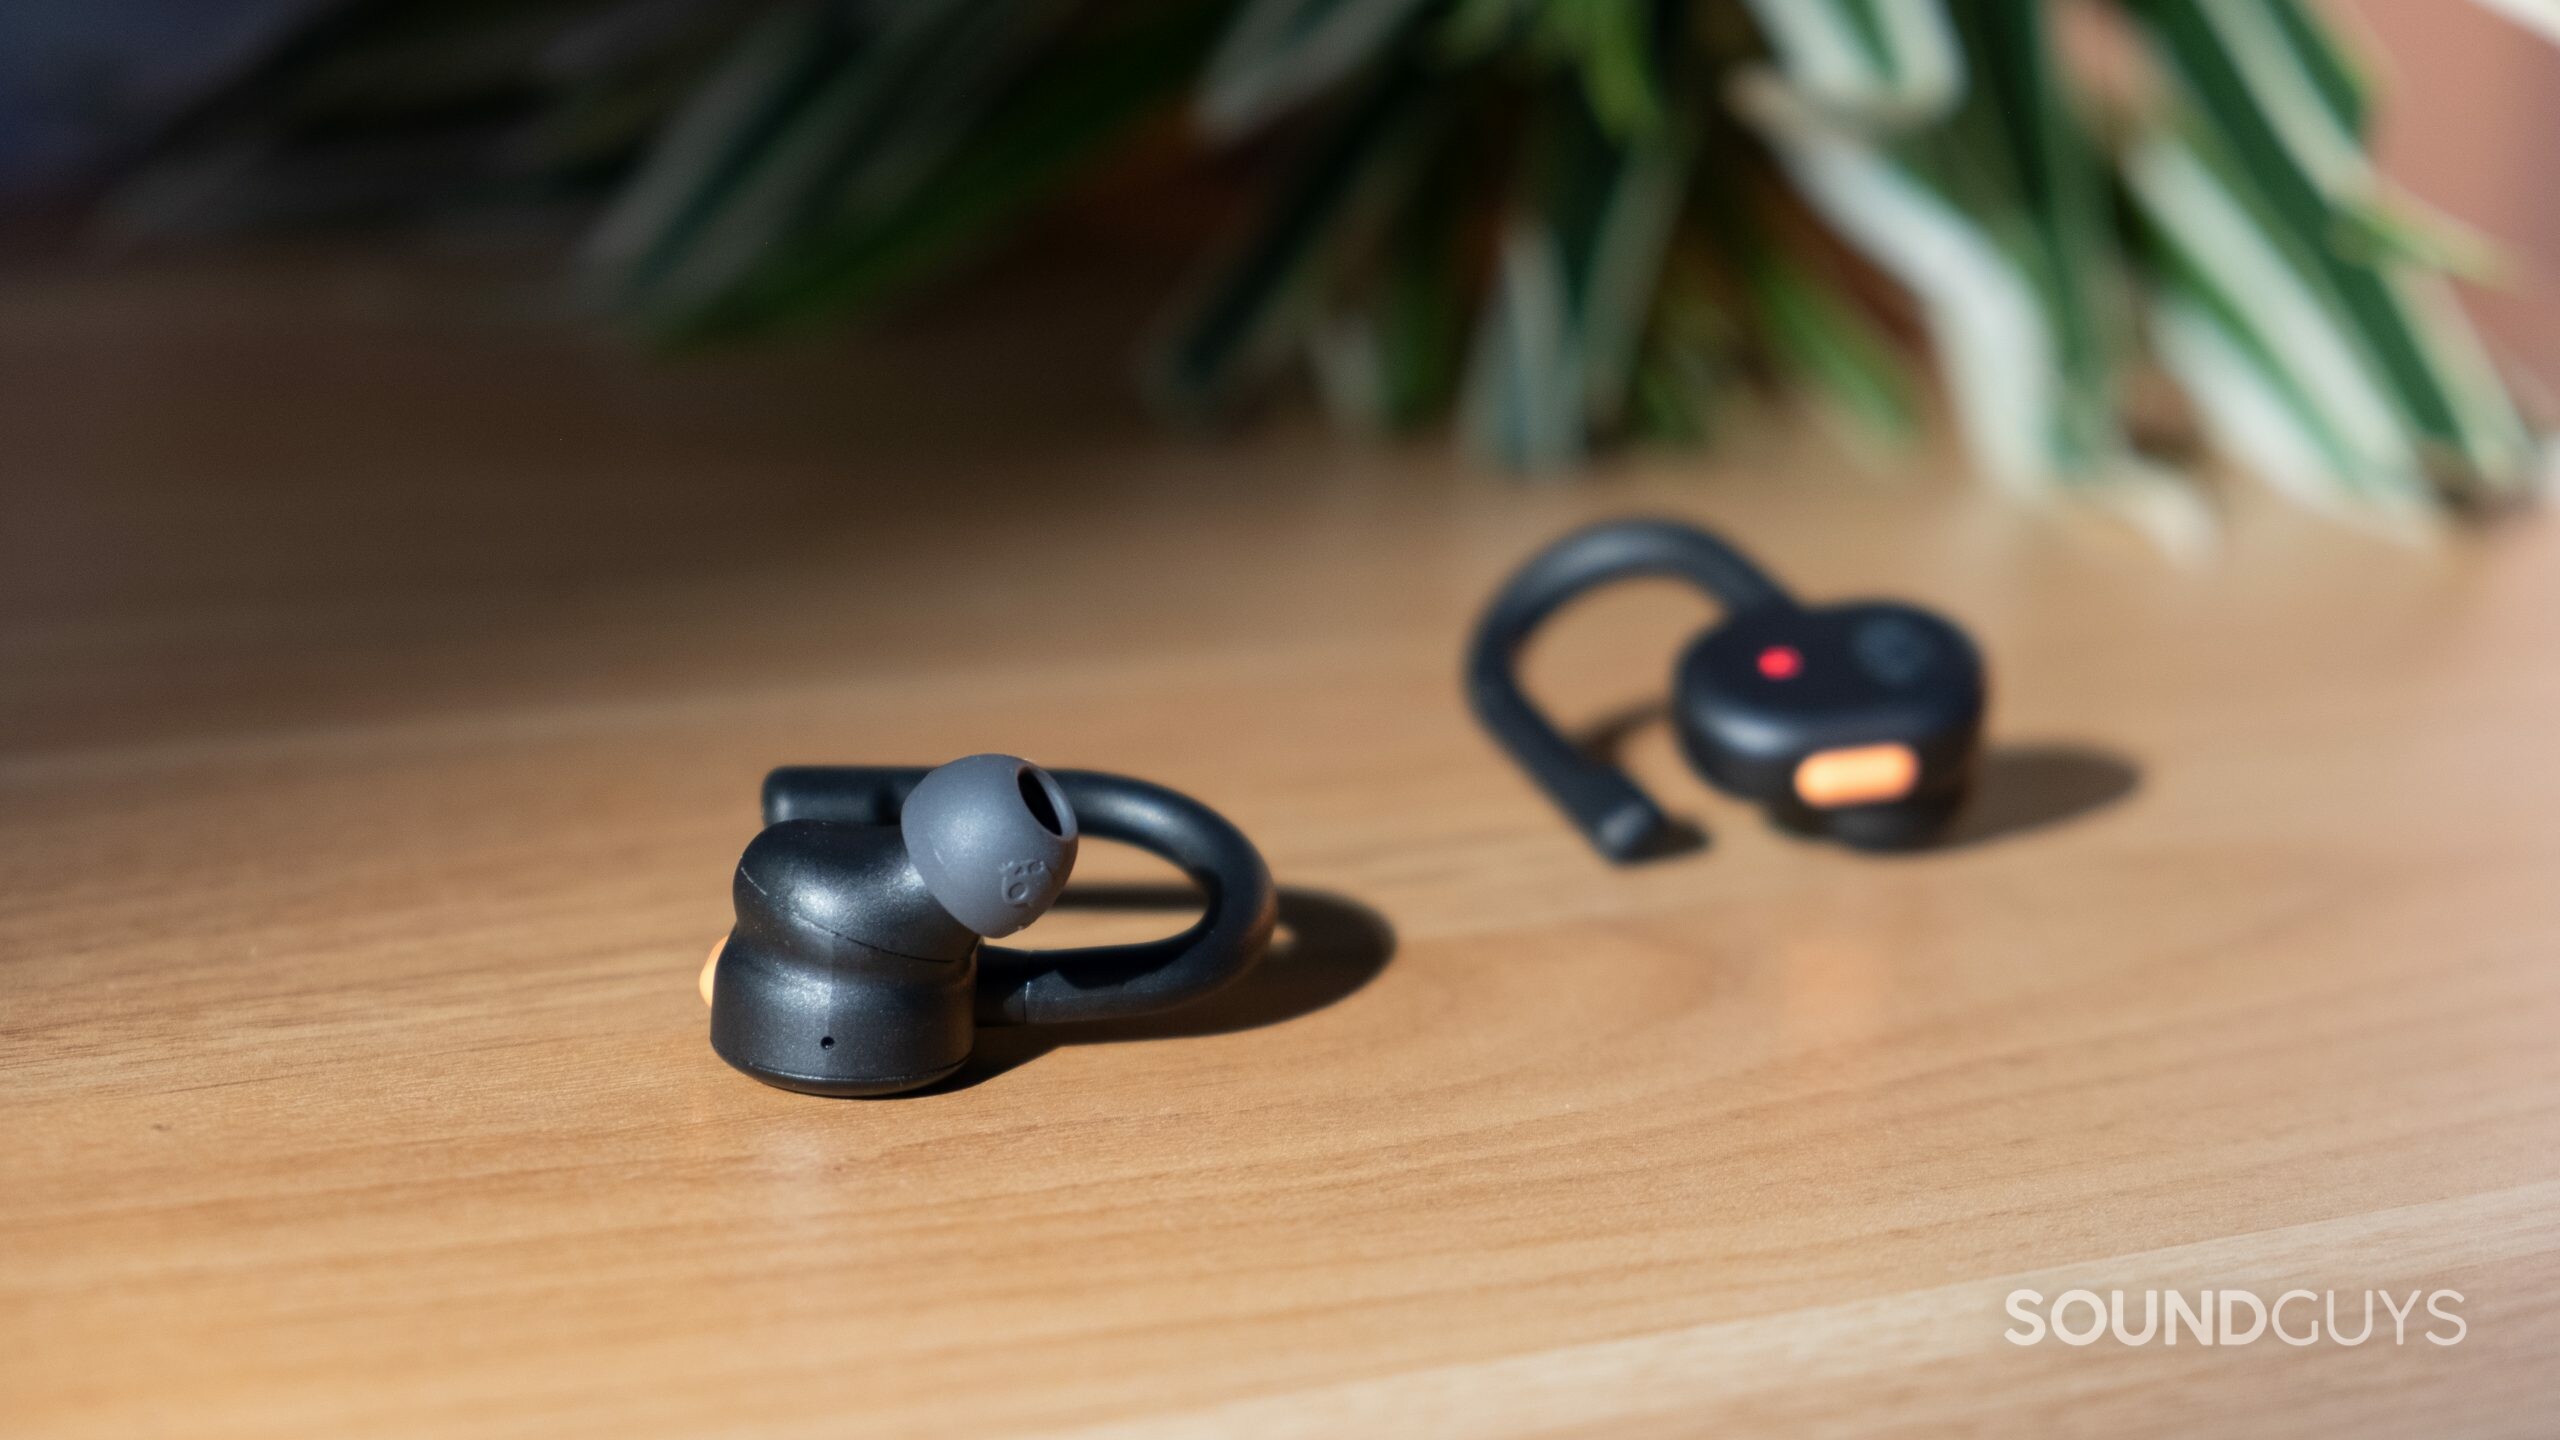 Push Active True Wireless Earbuds Featuring Skull-iQ technology 